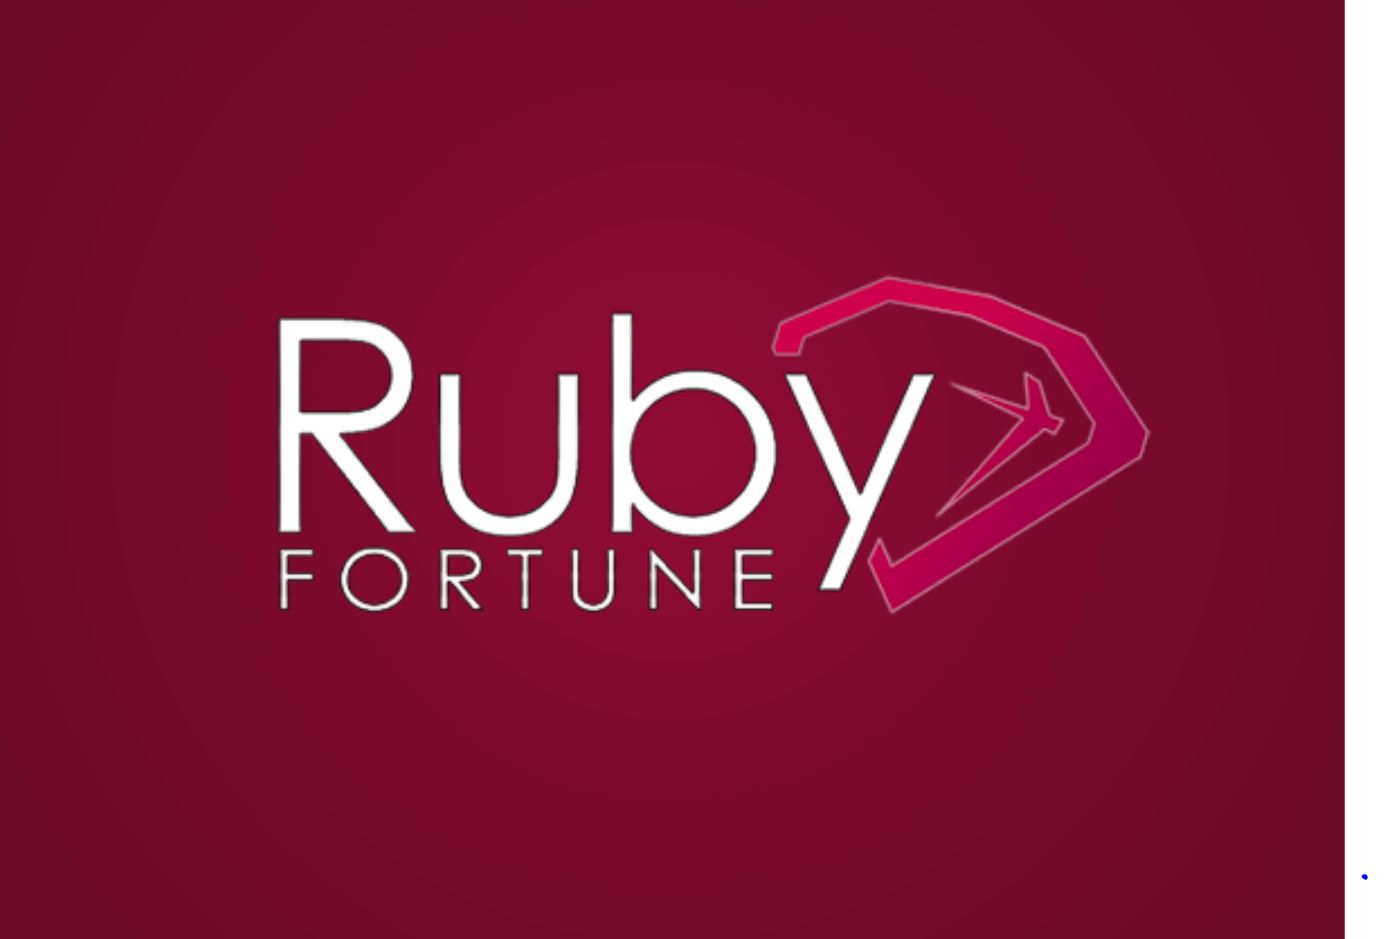 Ruby Fortune Overview